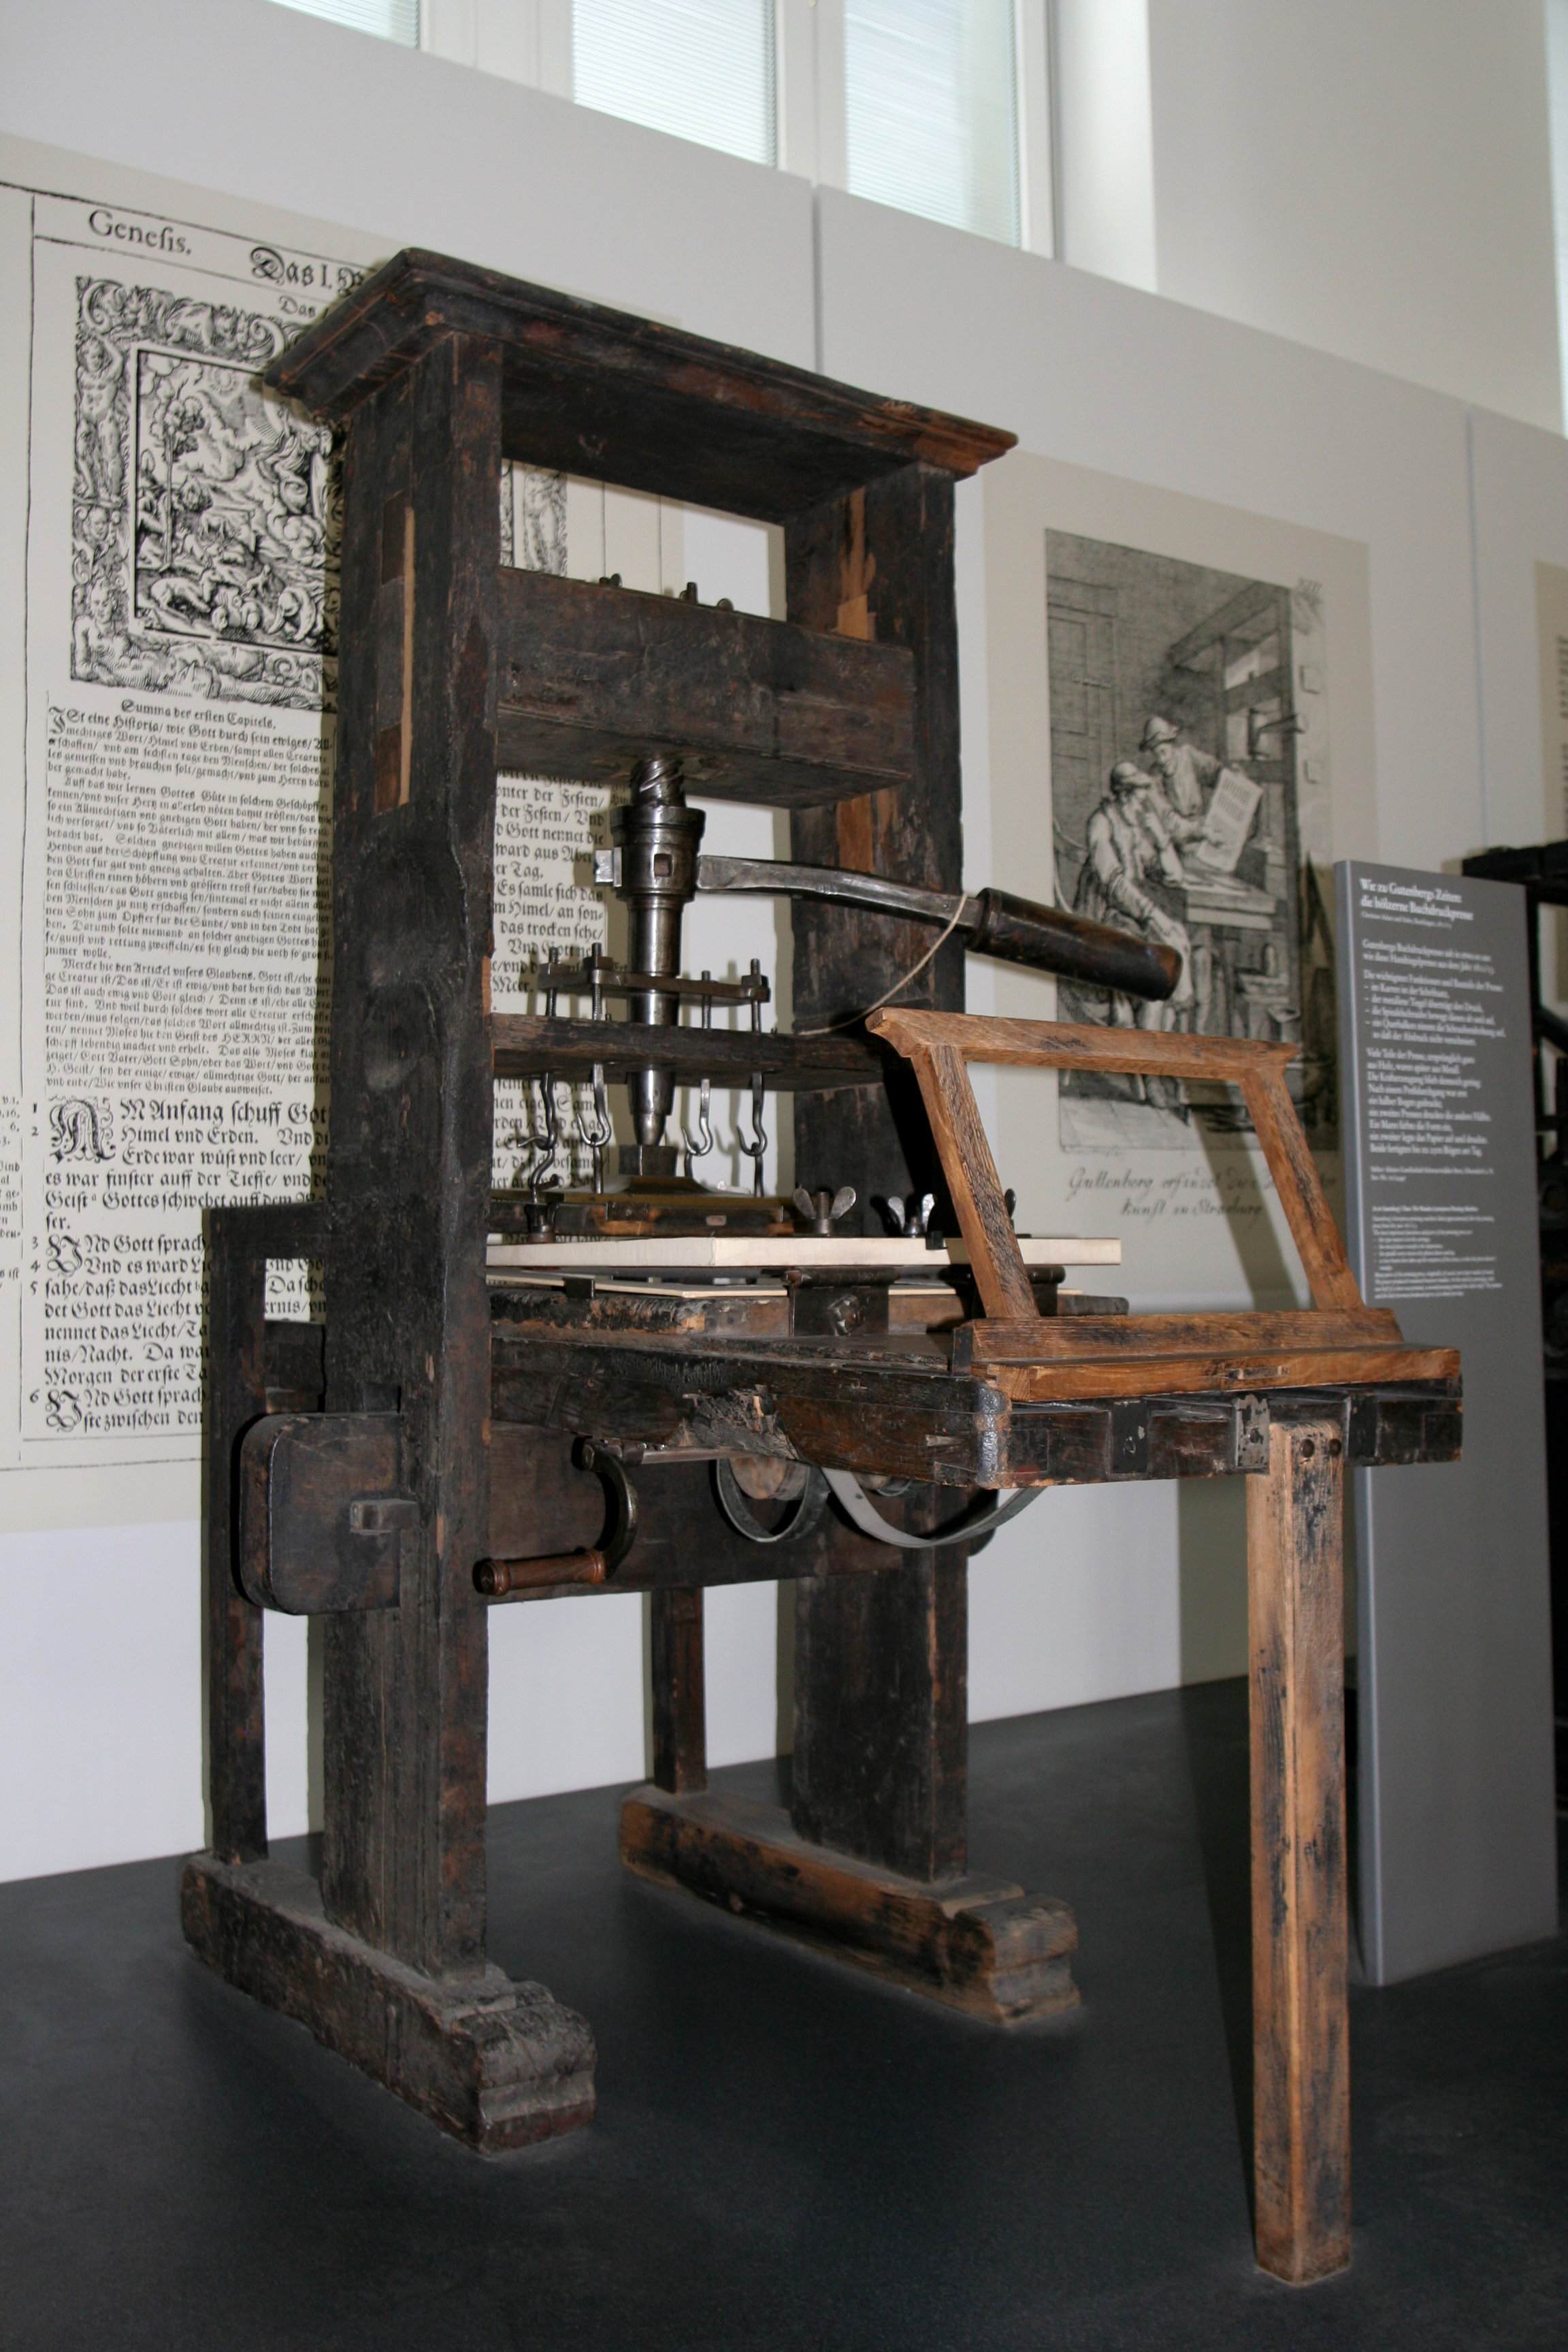 The Importance Of The Gutenberg Printing Press